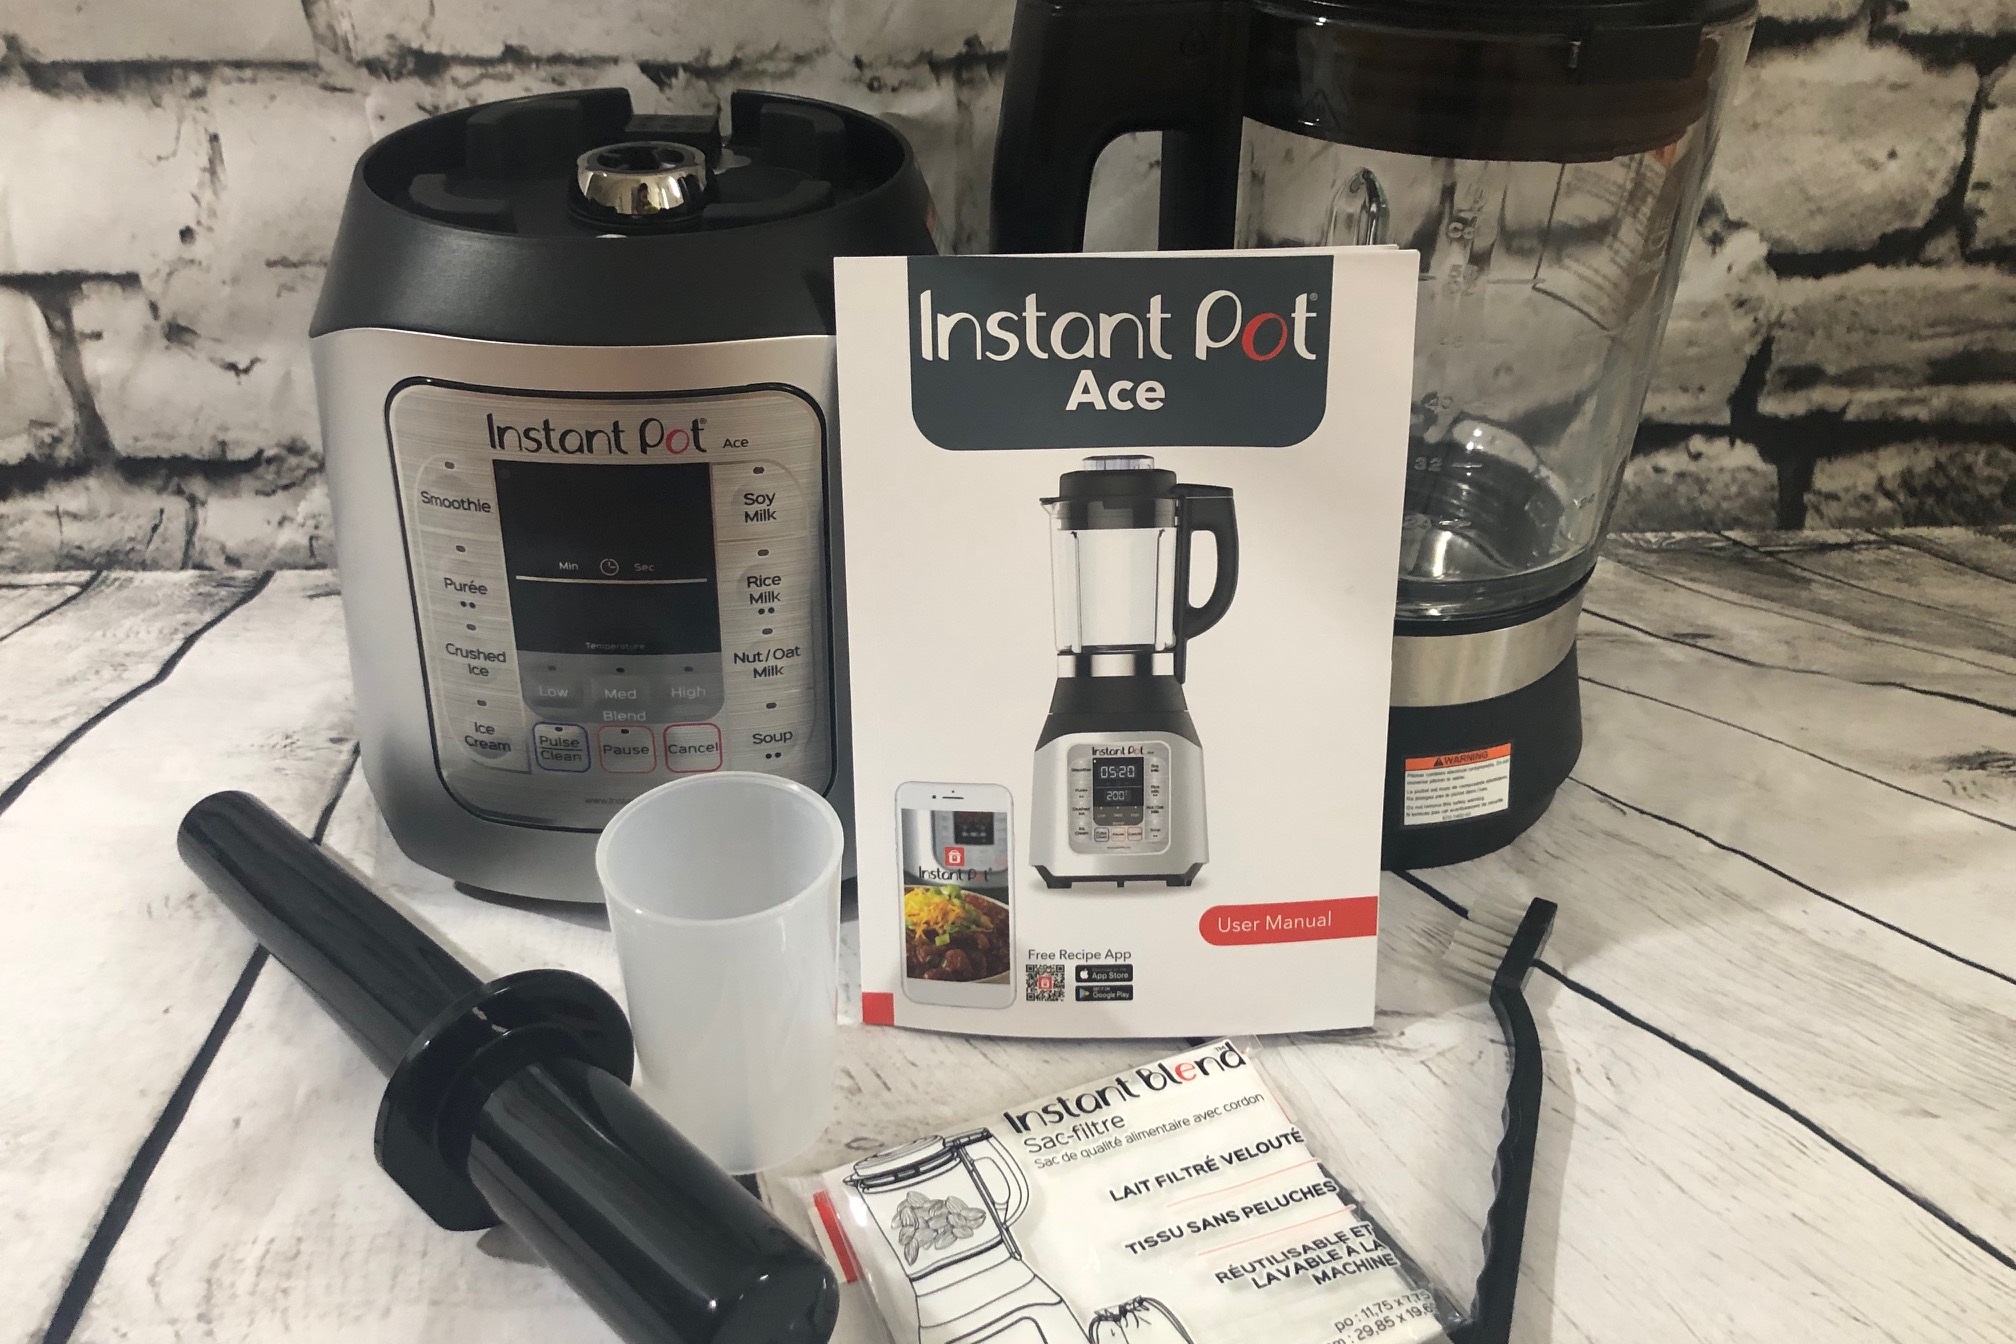 The $99 Instant Pot Ace Blender Blends Frozen Ingredients and Cooks Hot  Foods